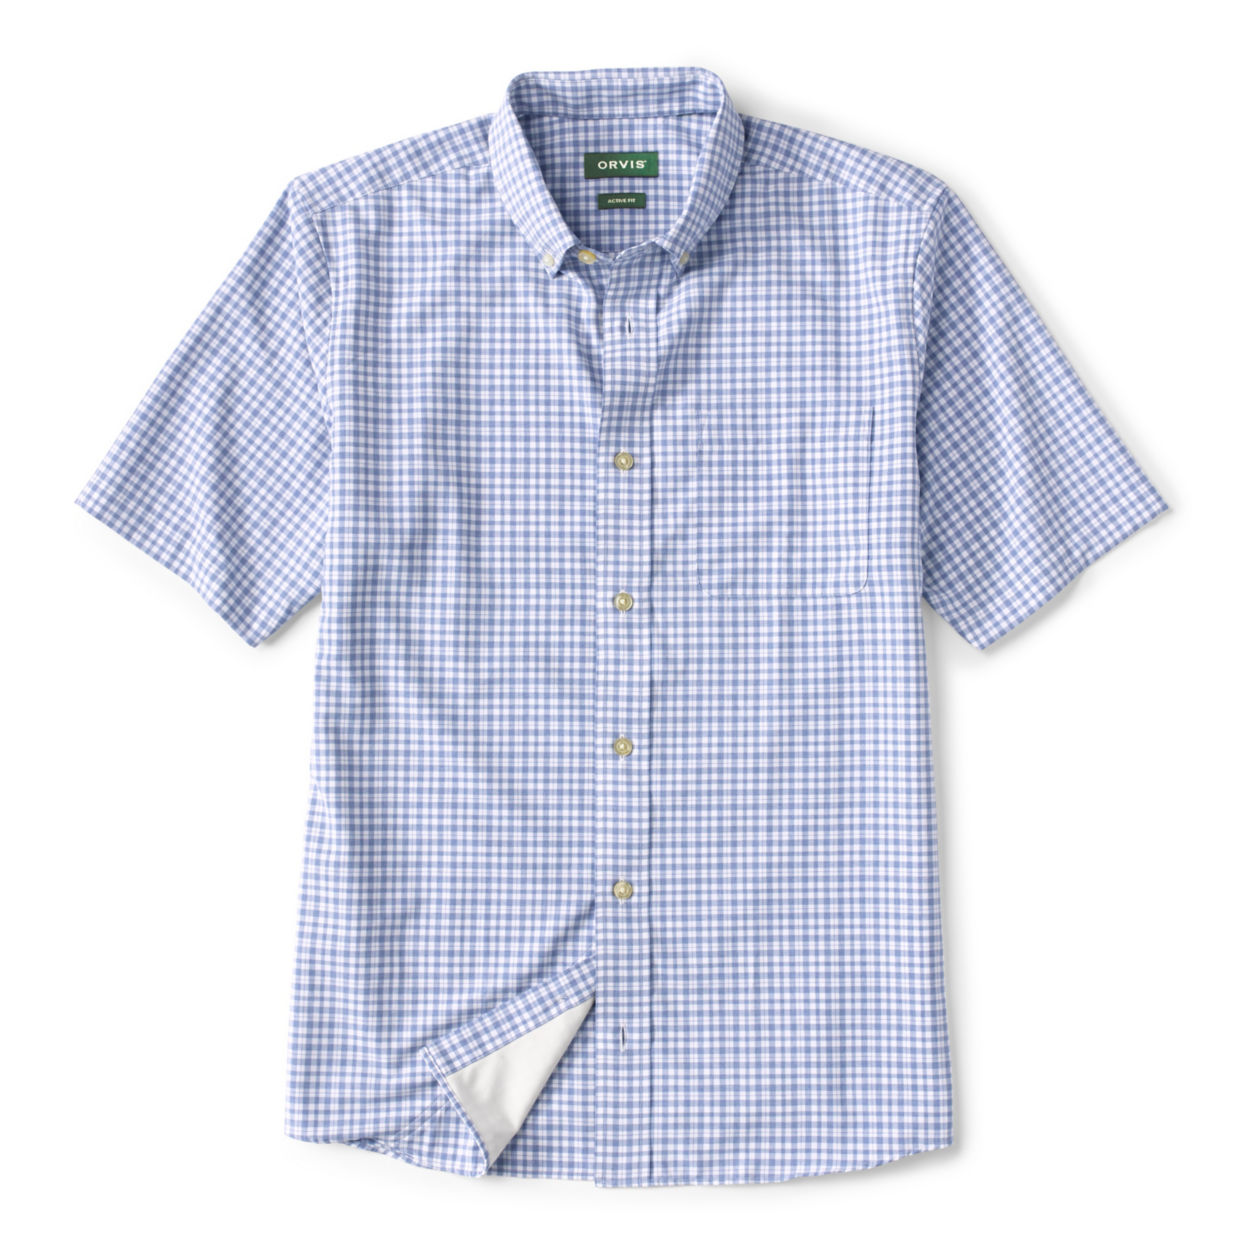 Men's Out-Of-Office Comfort Stretch Short-Sleeved Shirt River Delta Size Medium Polyester Orvis